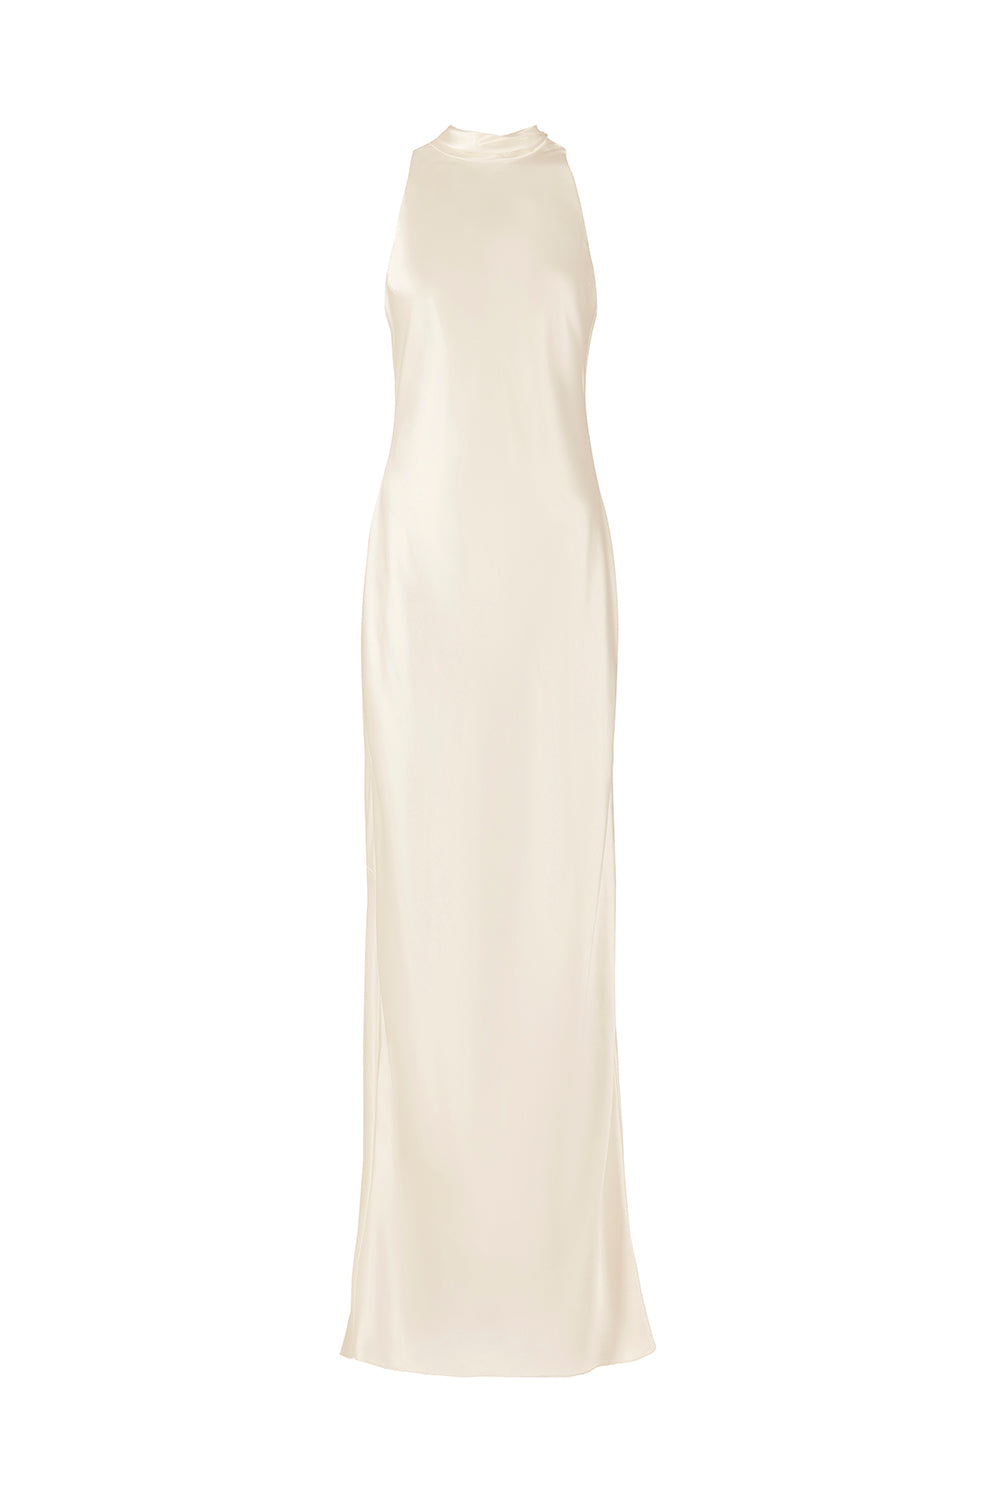 Load image into Gallery viewer, STYLE 017 // SATIN HALTER